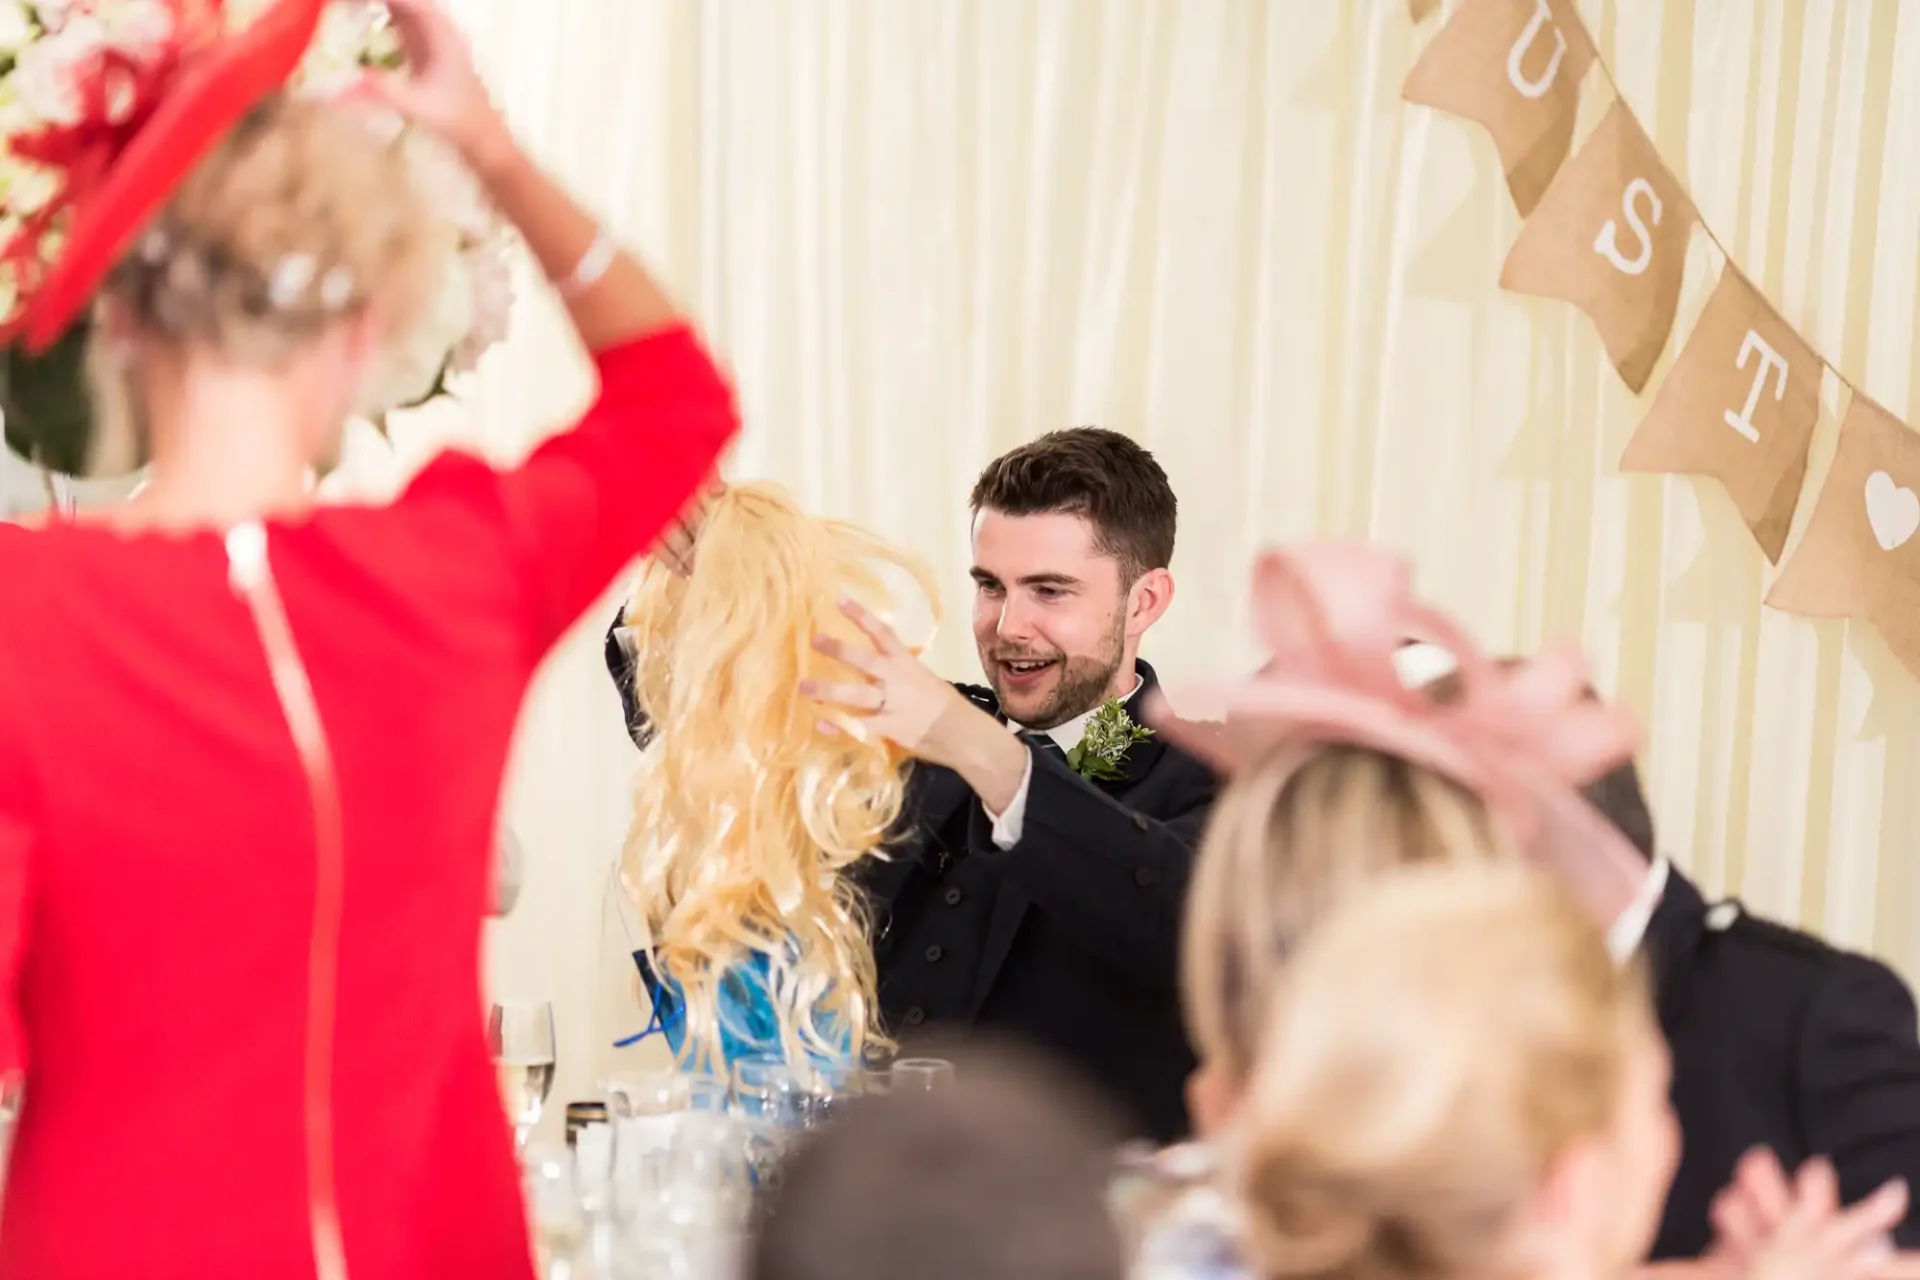 A groom smiles while engaging in a lively wig-toss game with guests at a wedding reception, under a banner that reads "just married.